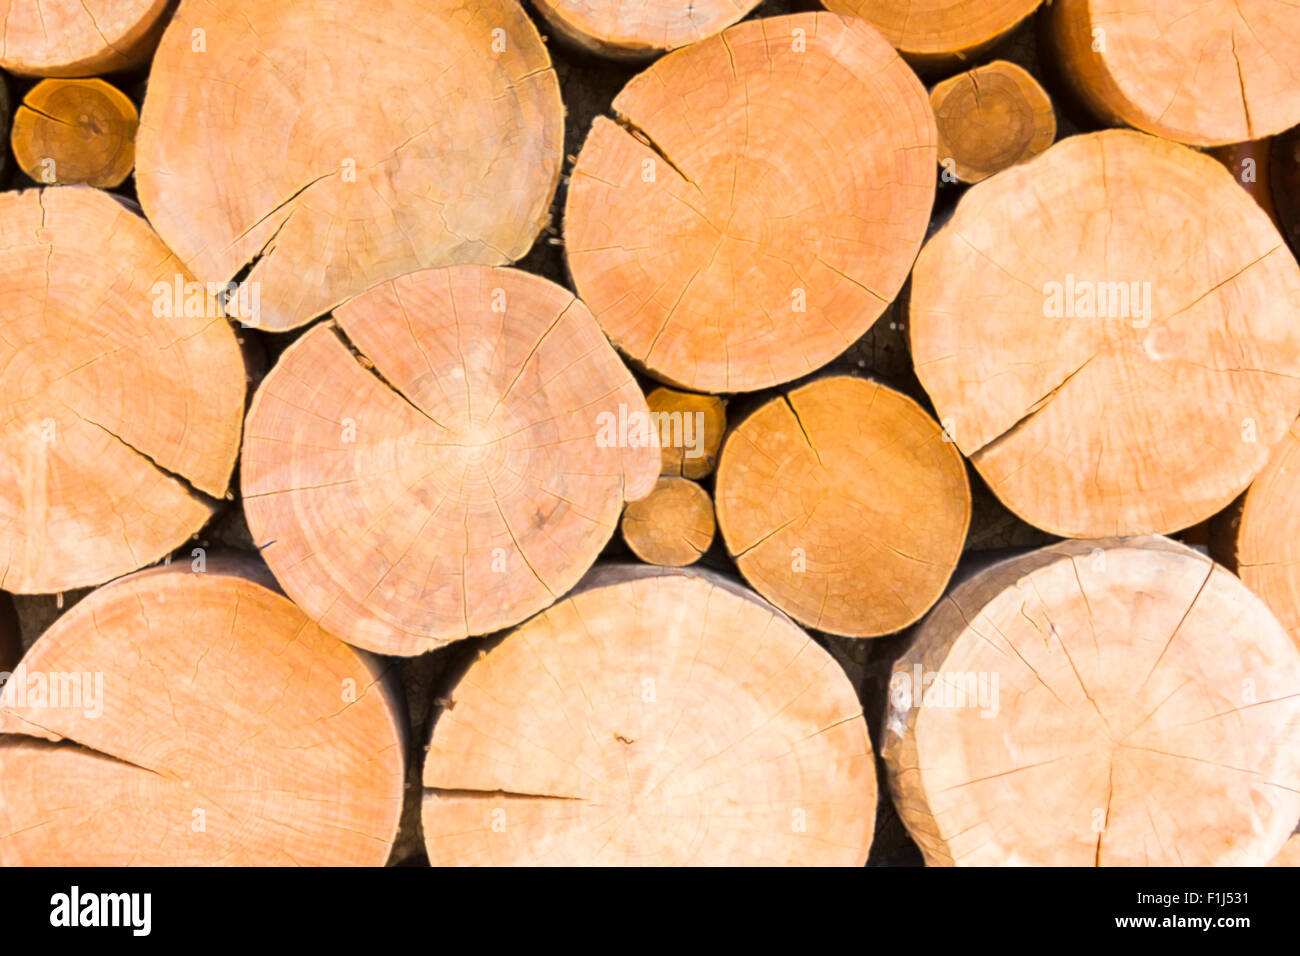 Many large and thick cracked tree beams in a pile Stock Photo